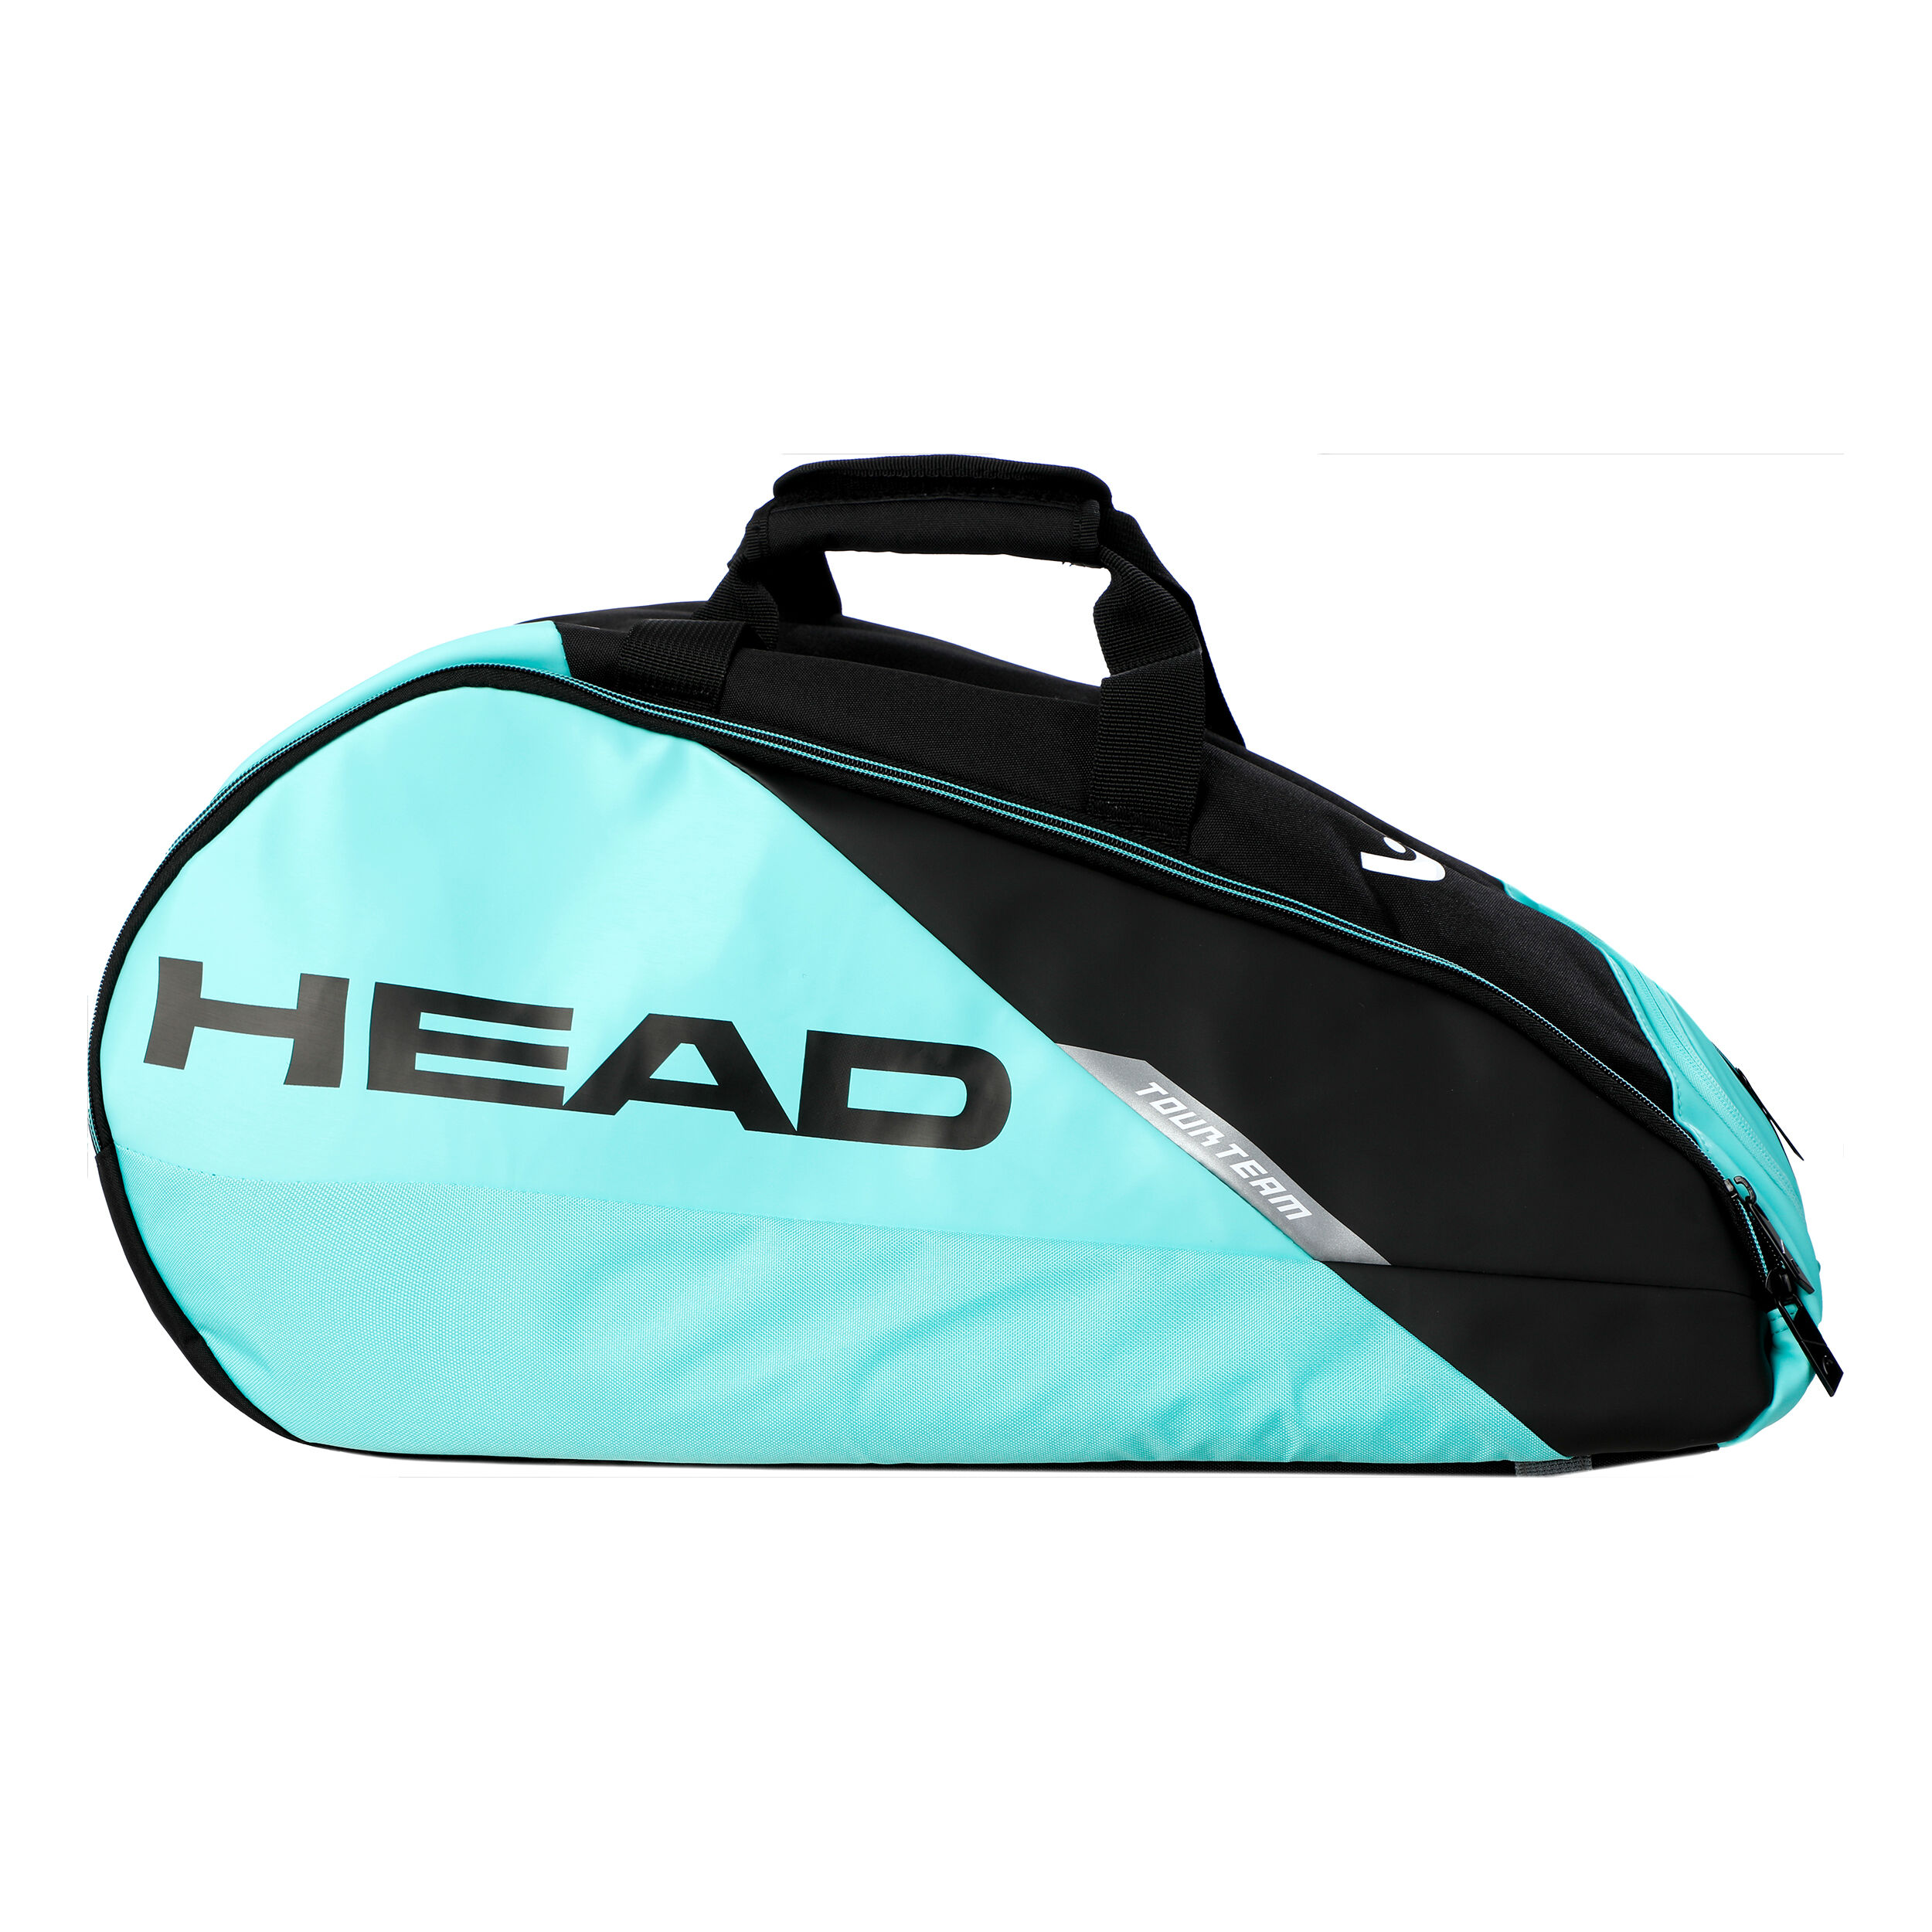 Padel bags from HEAD online | Padel-Point